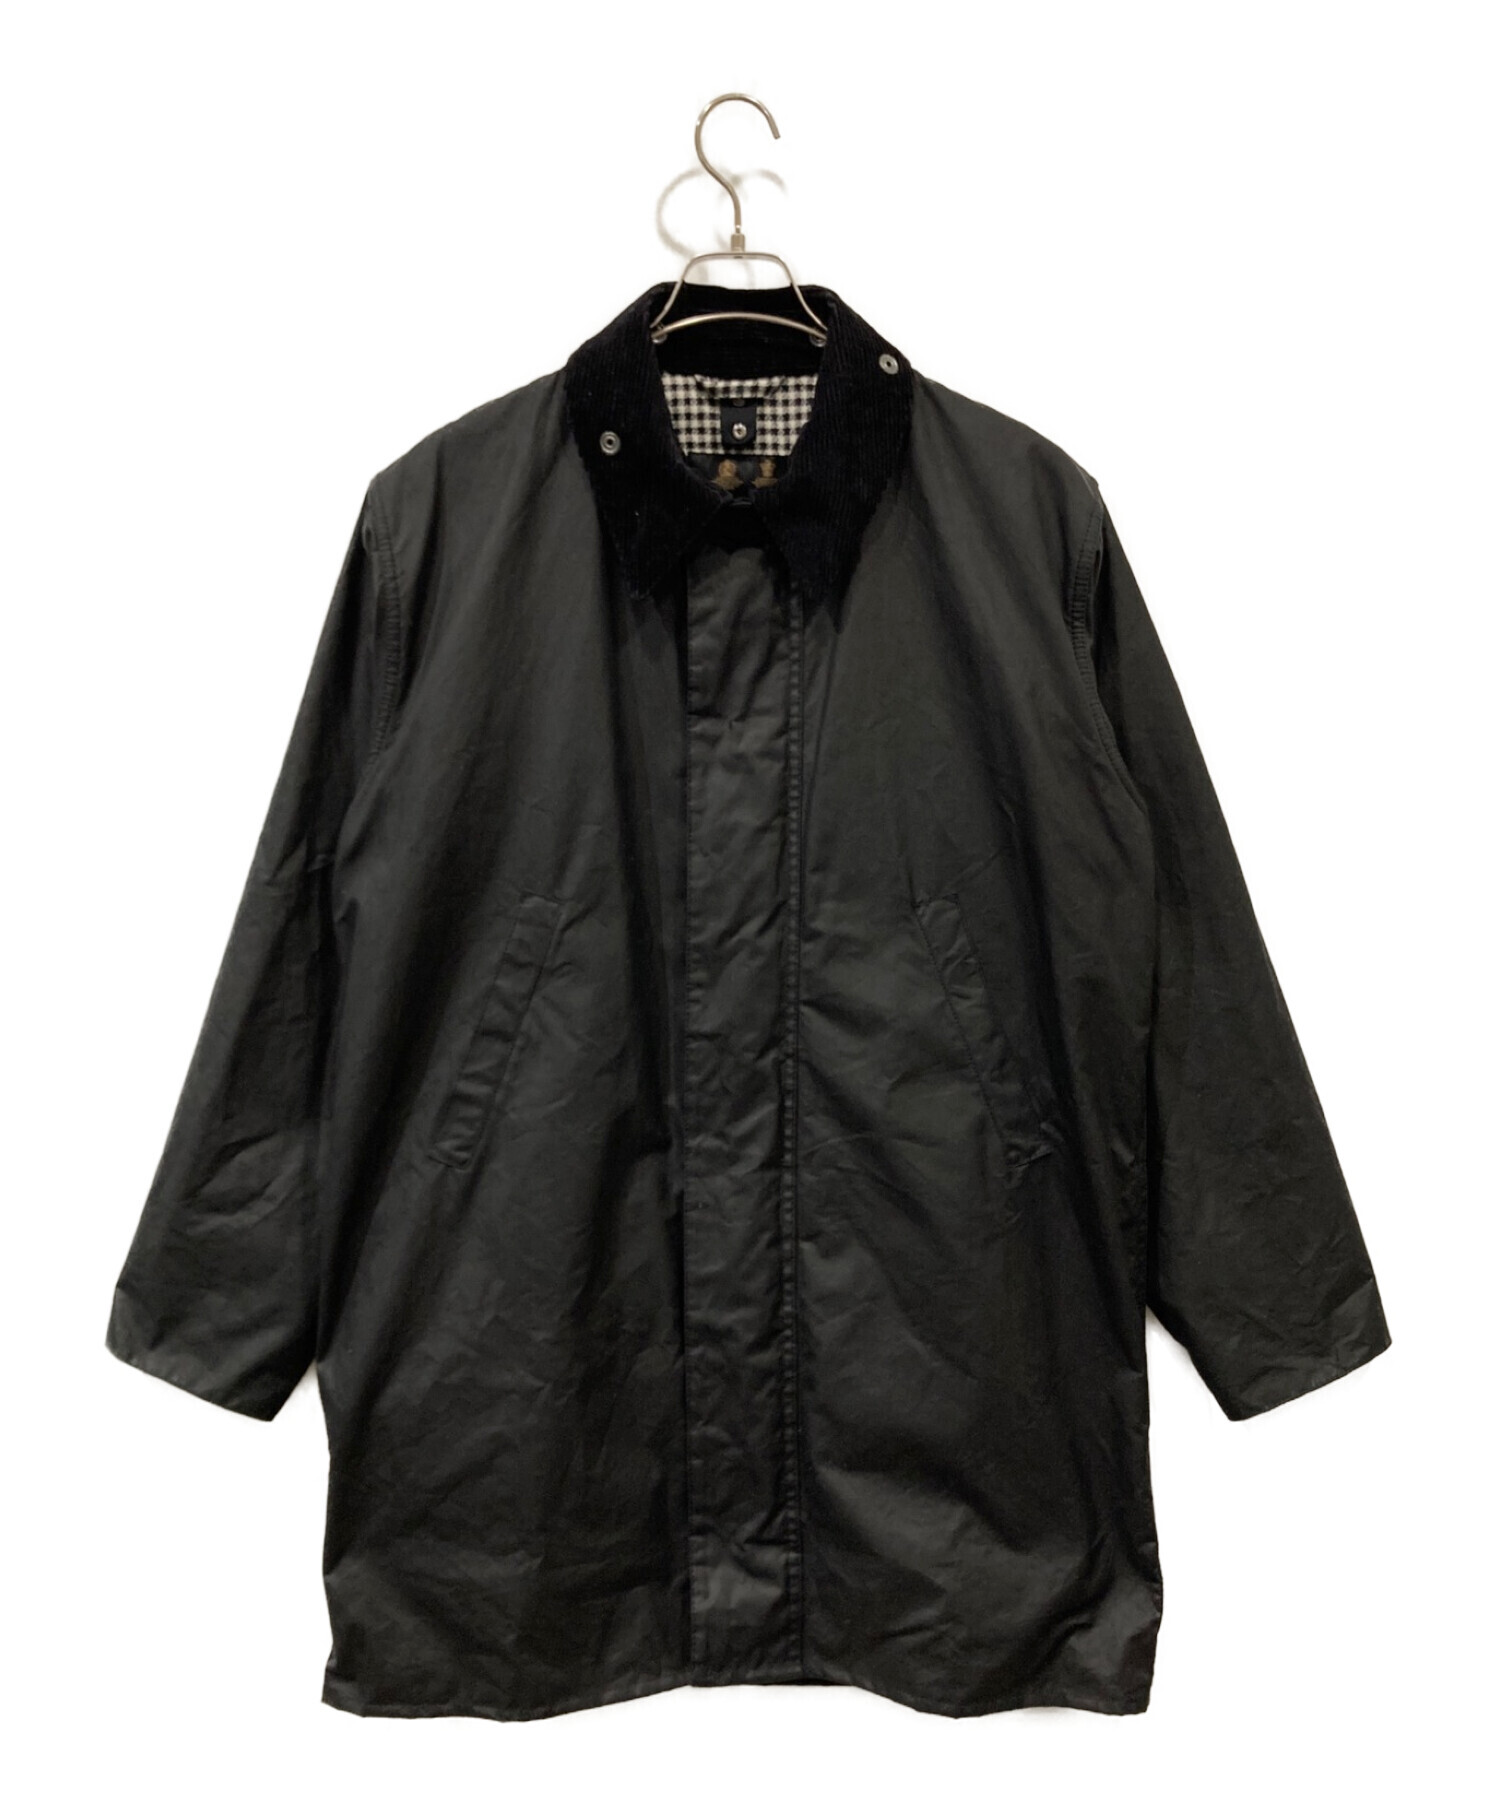 Barbour for UNITED ARROWS “BEAUFORT” 38 - カバーオール